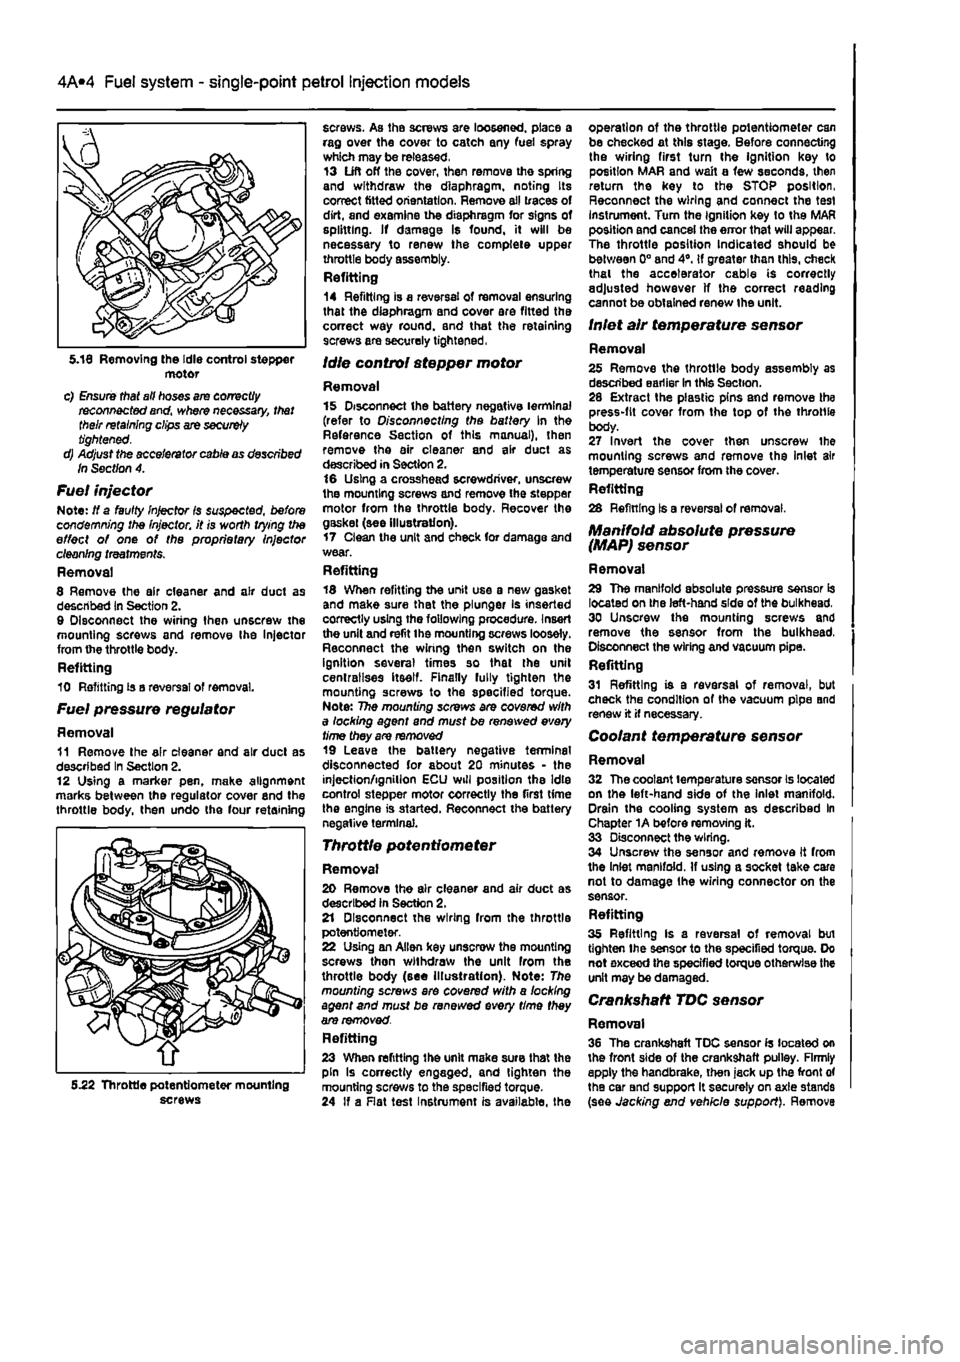 FIAT PUNTO 1999 176 / 1.G Workshop Manual 
4A*2 Fuel system - single-point petrol Injection models 
motor c) Ensure that all hoses are correctly reconnected and, where necessary, that their retaining clips are securely tightened. d) Adjust th